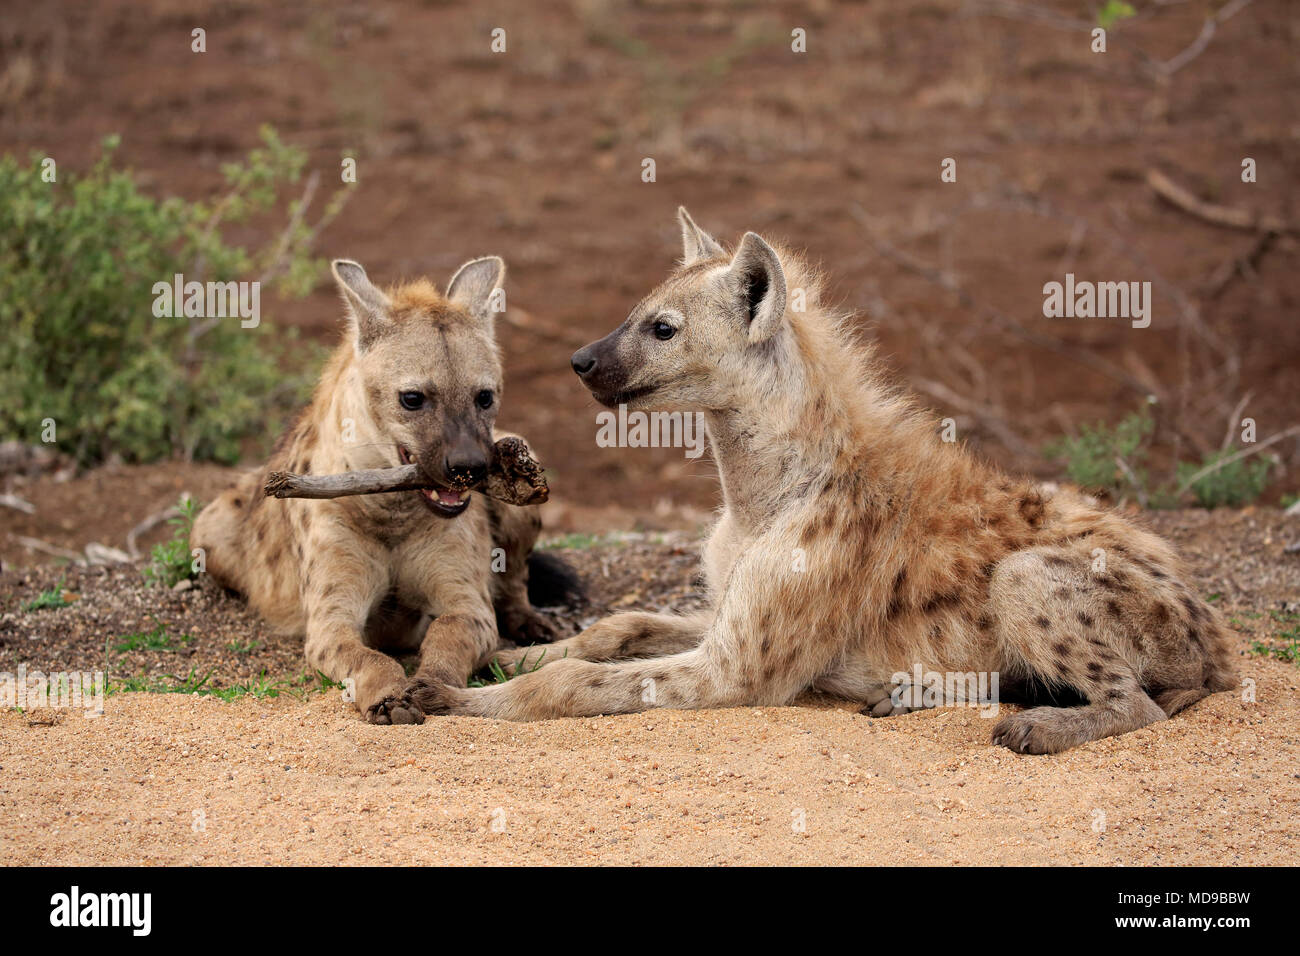 Spotted hyenas (Crocuta crocuta), two young animals with bones, Kruger National Park, South Africa Stock Photo